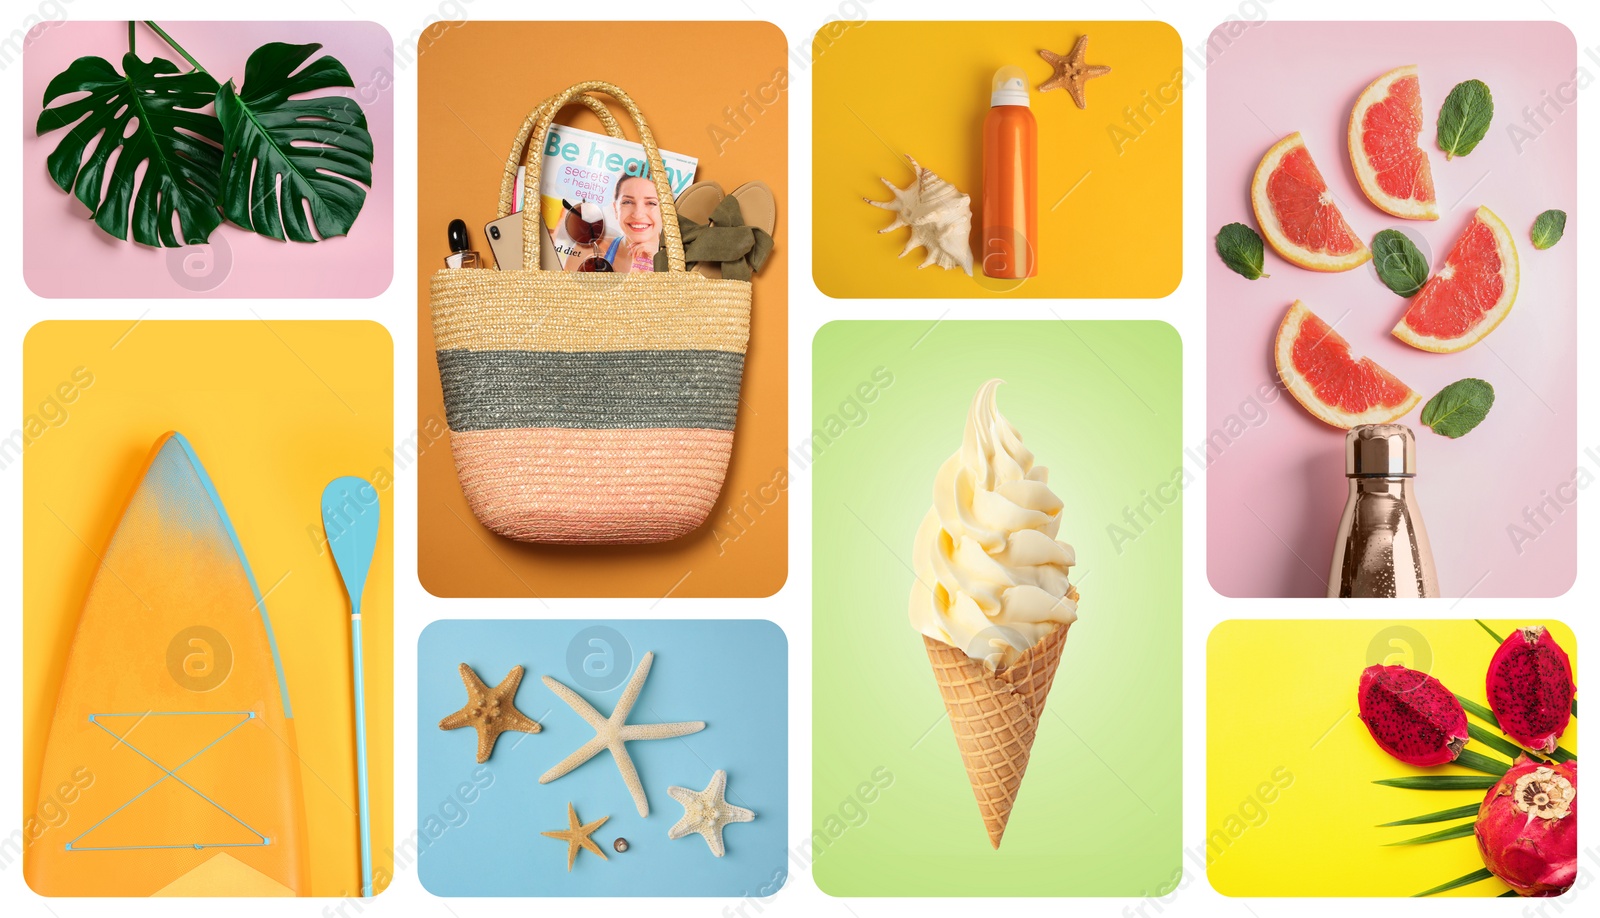 Image of Collage with ice cream, SUP board, fruits and beach accessories. Summertime, banner design